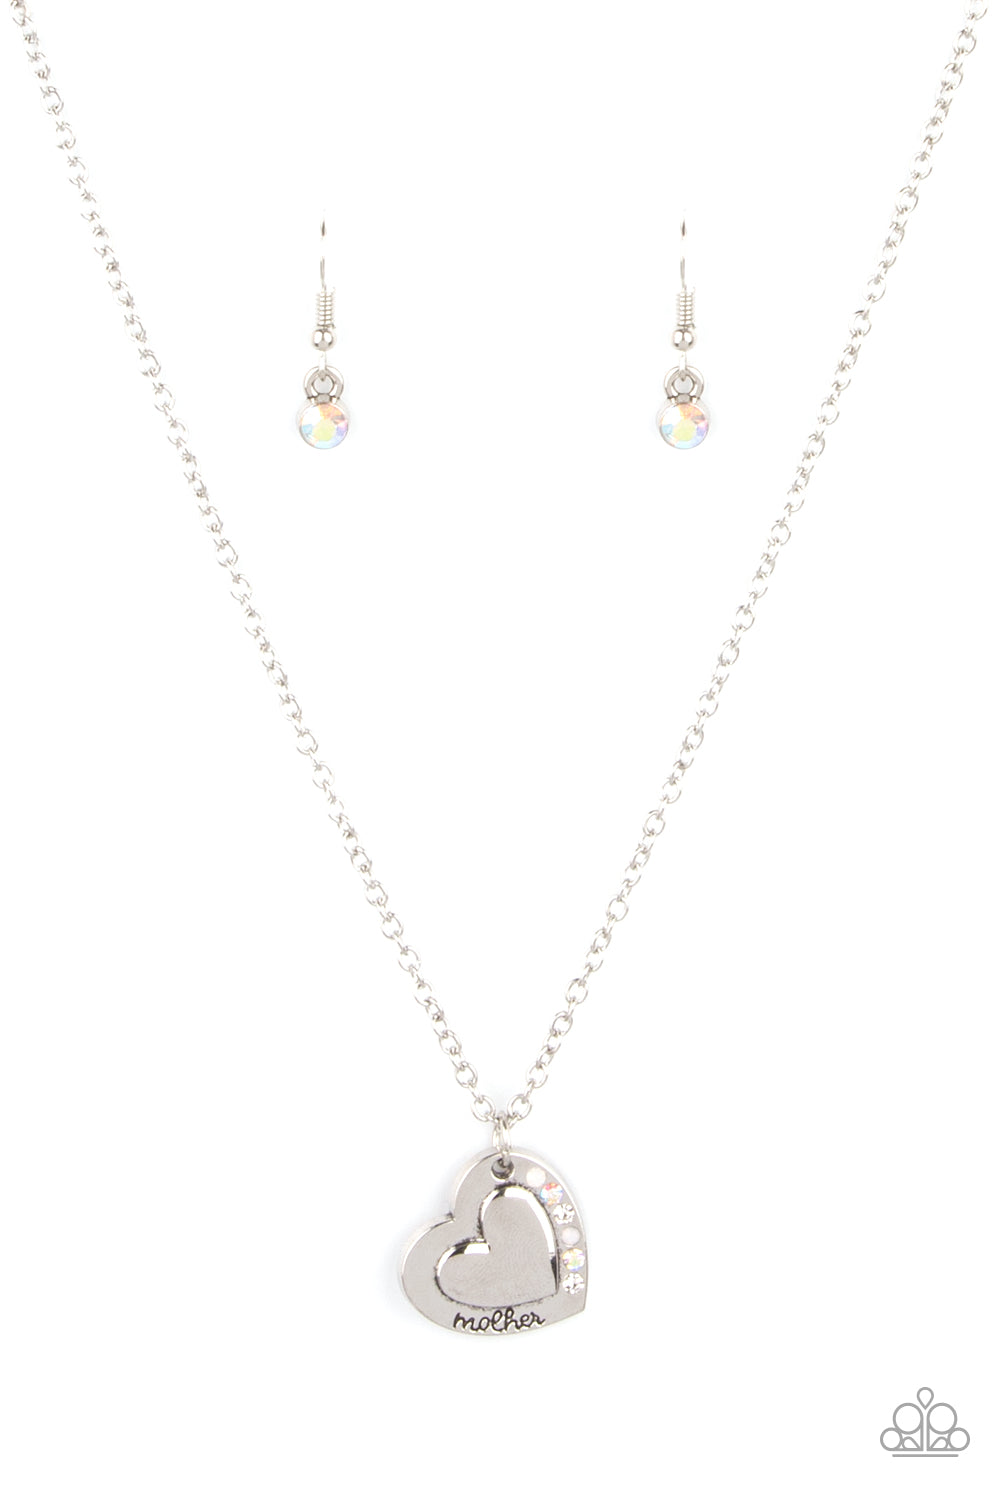 Happily Heartwarming - White and Iridescent Rhinestone Necklace - Paparazzi Accessories